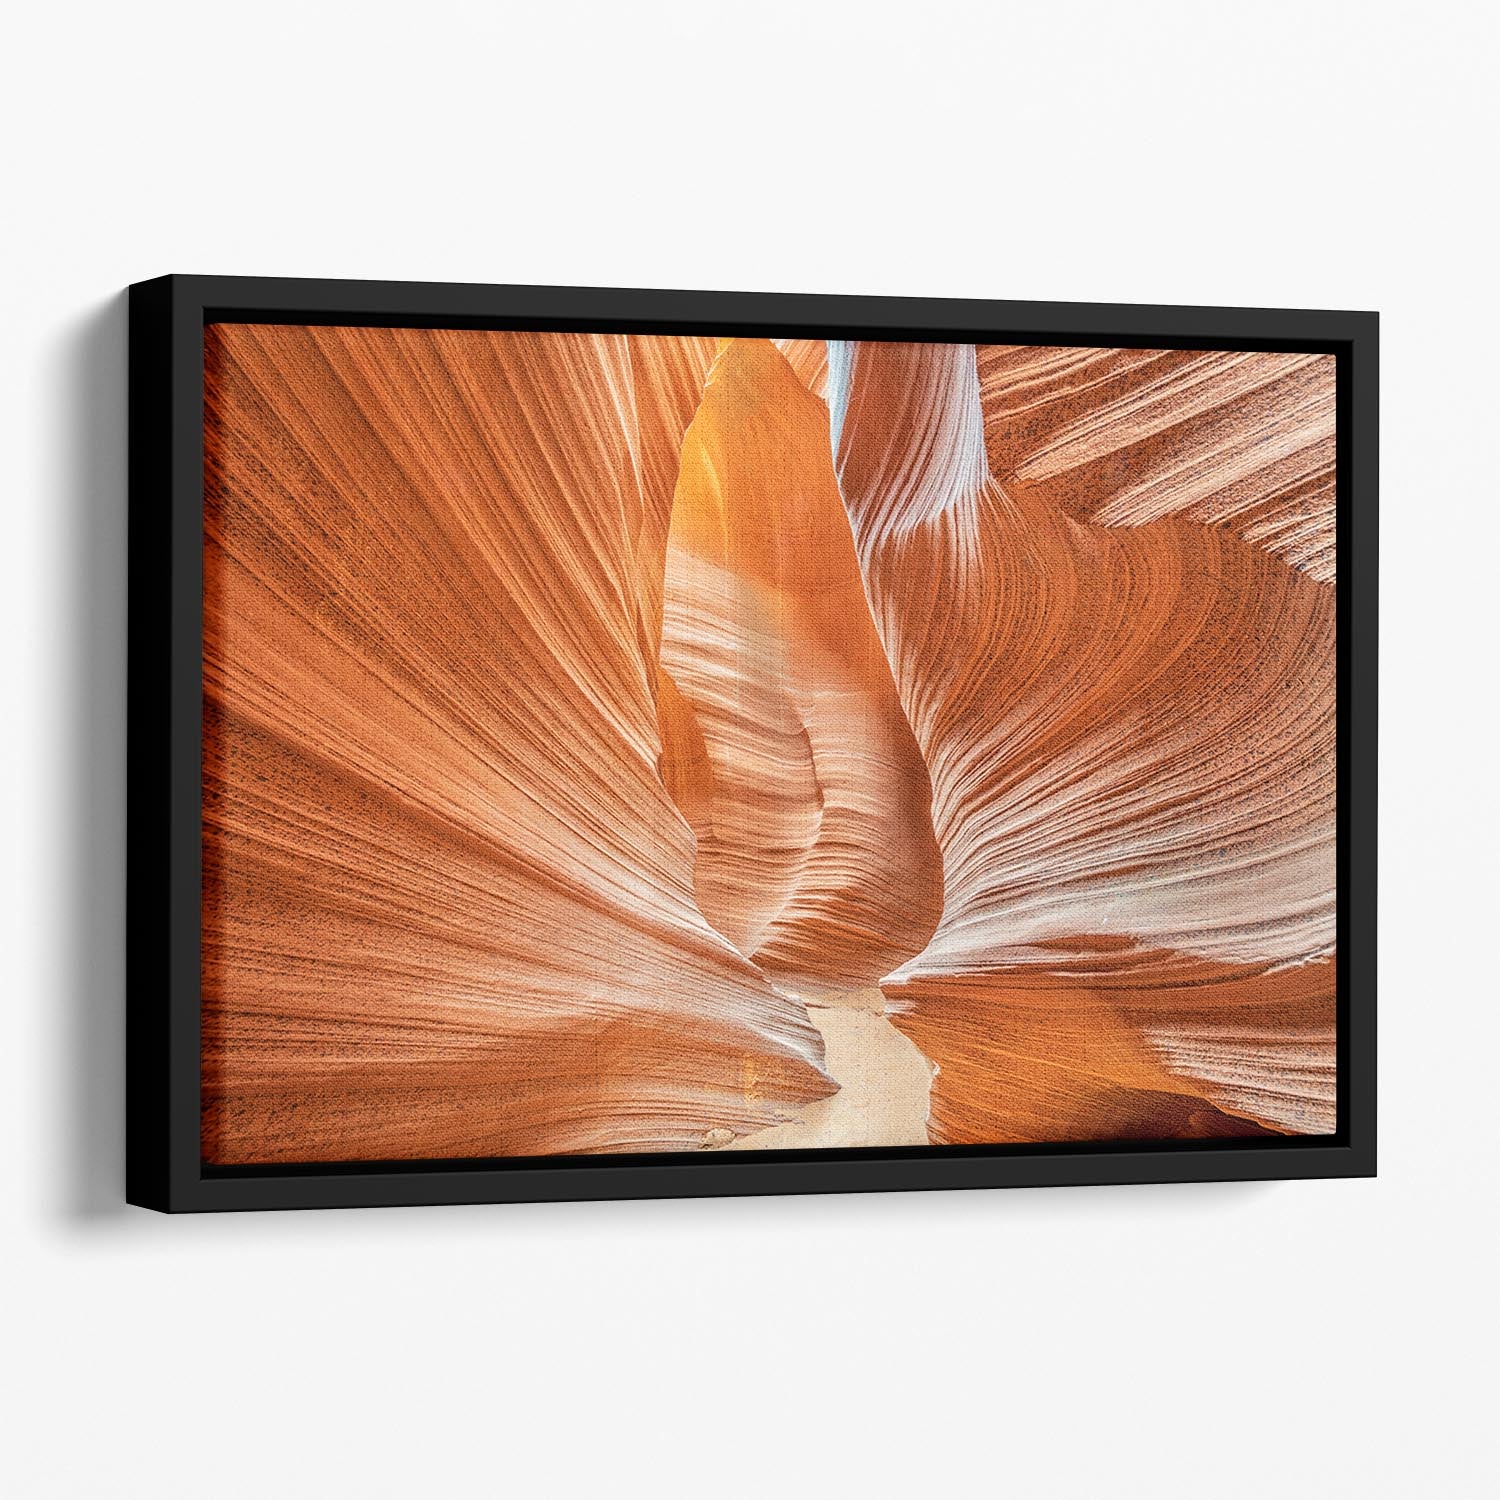 Passage To The Temple Floating Framed Canvas - Canvas Art Rocks - 1